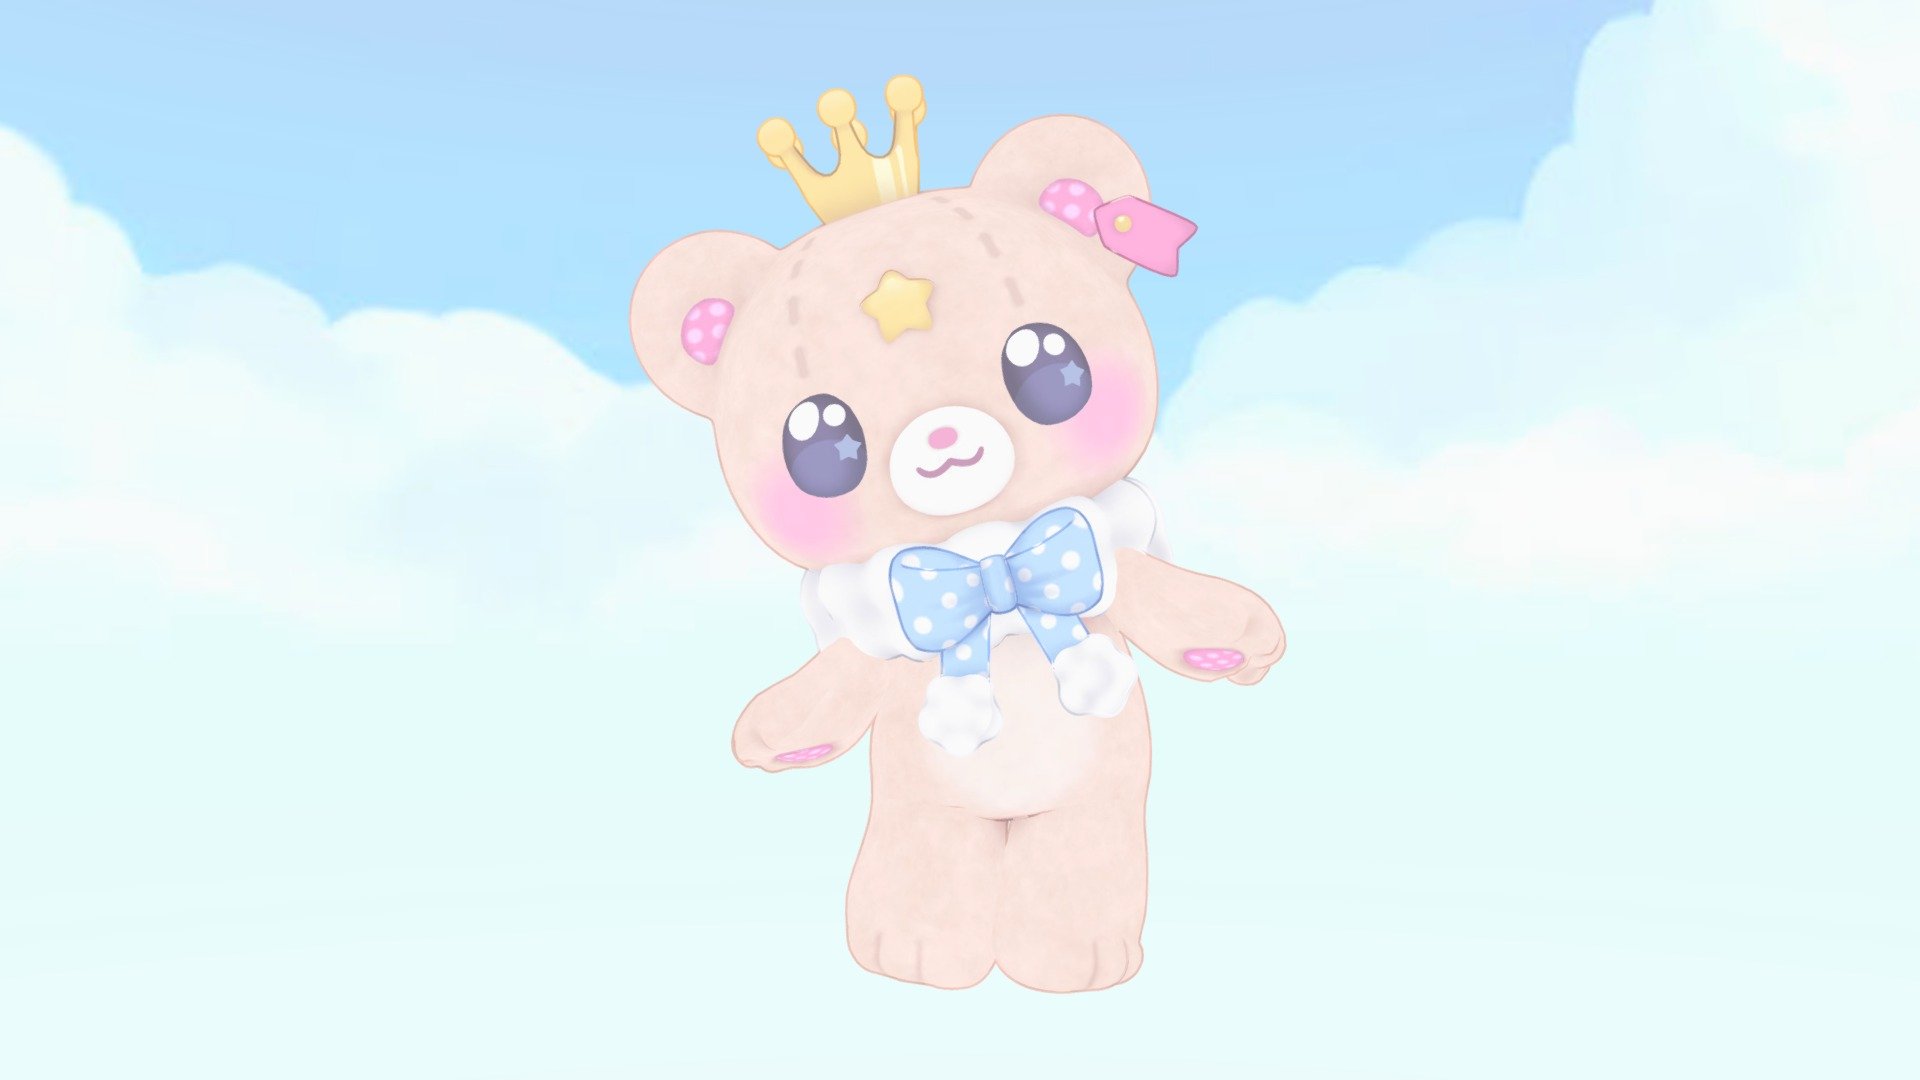 This was a commission for vtuber Hoshi Yumekawa! The cutest teddy bear ever! 

-Modelling and rigging done in Blender
-Textures done in Substance Painter
-Animation is a mix of Mixamo and Blender - Hoshi's Teddy Bear - 3D model by icebell 3d model